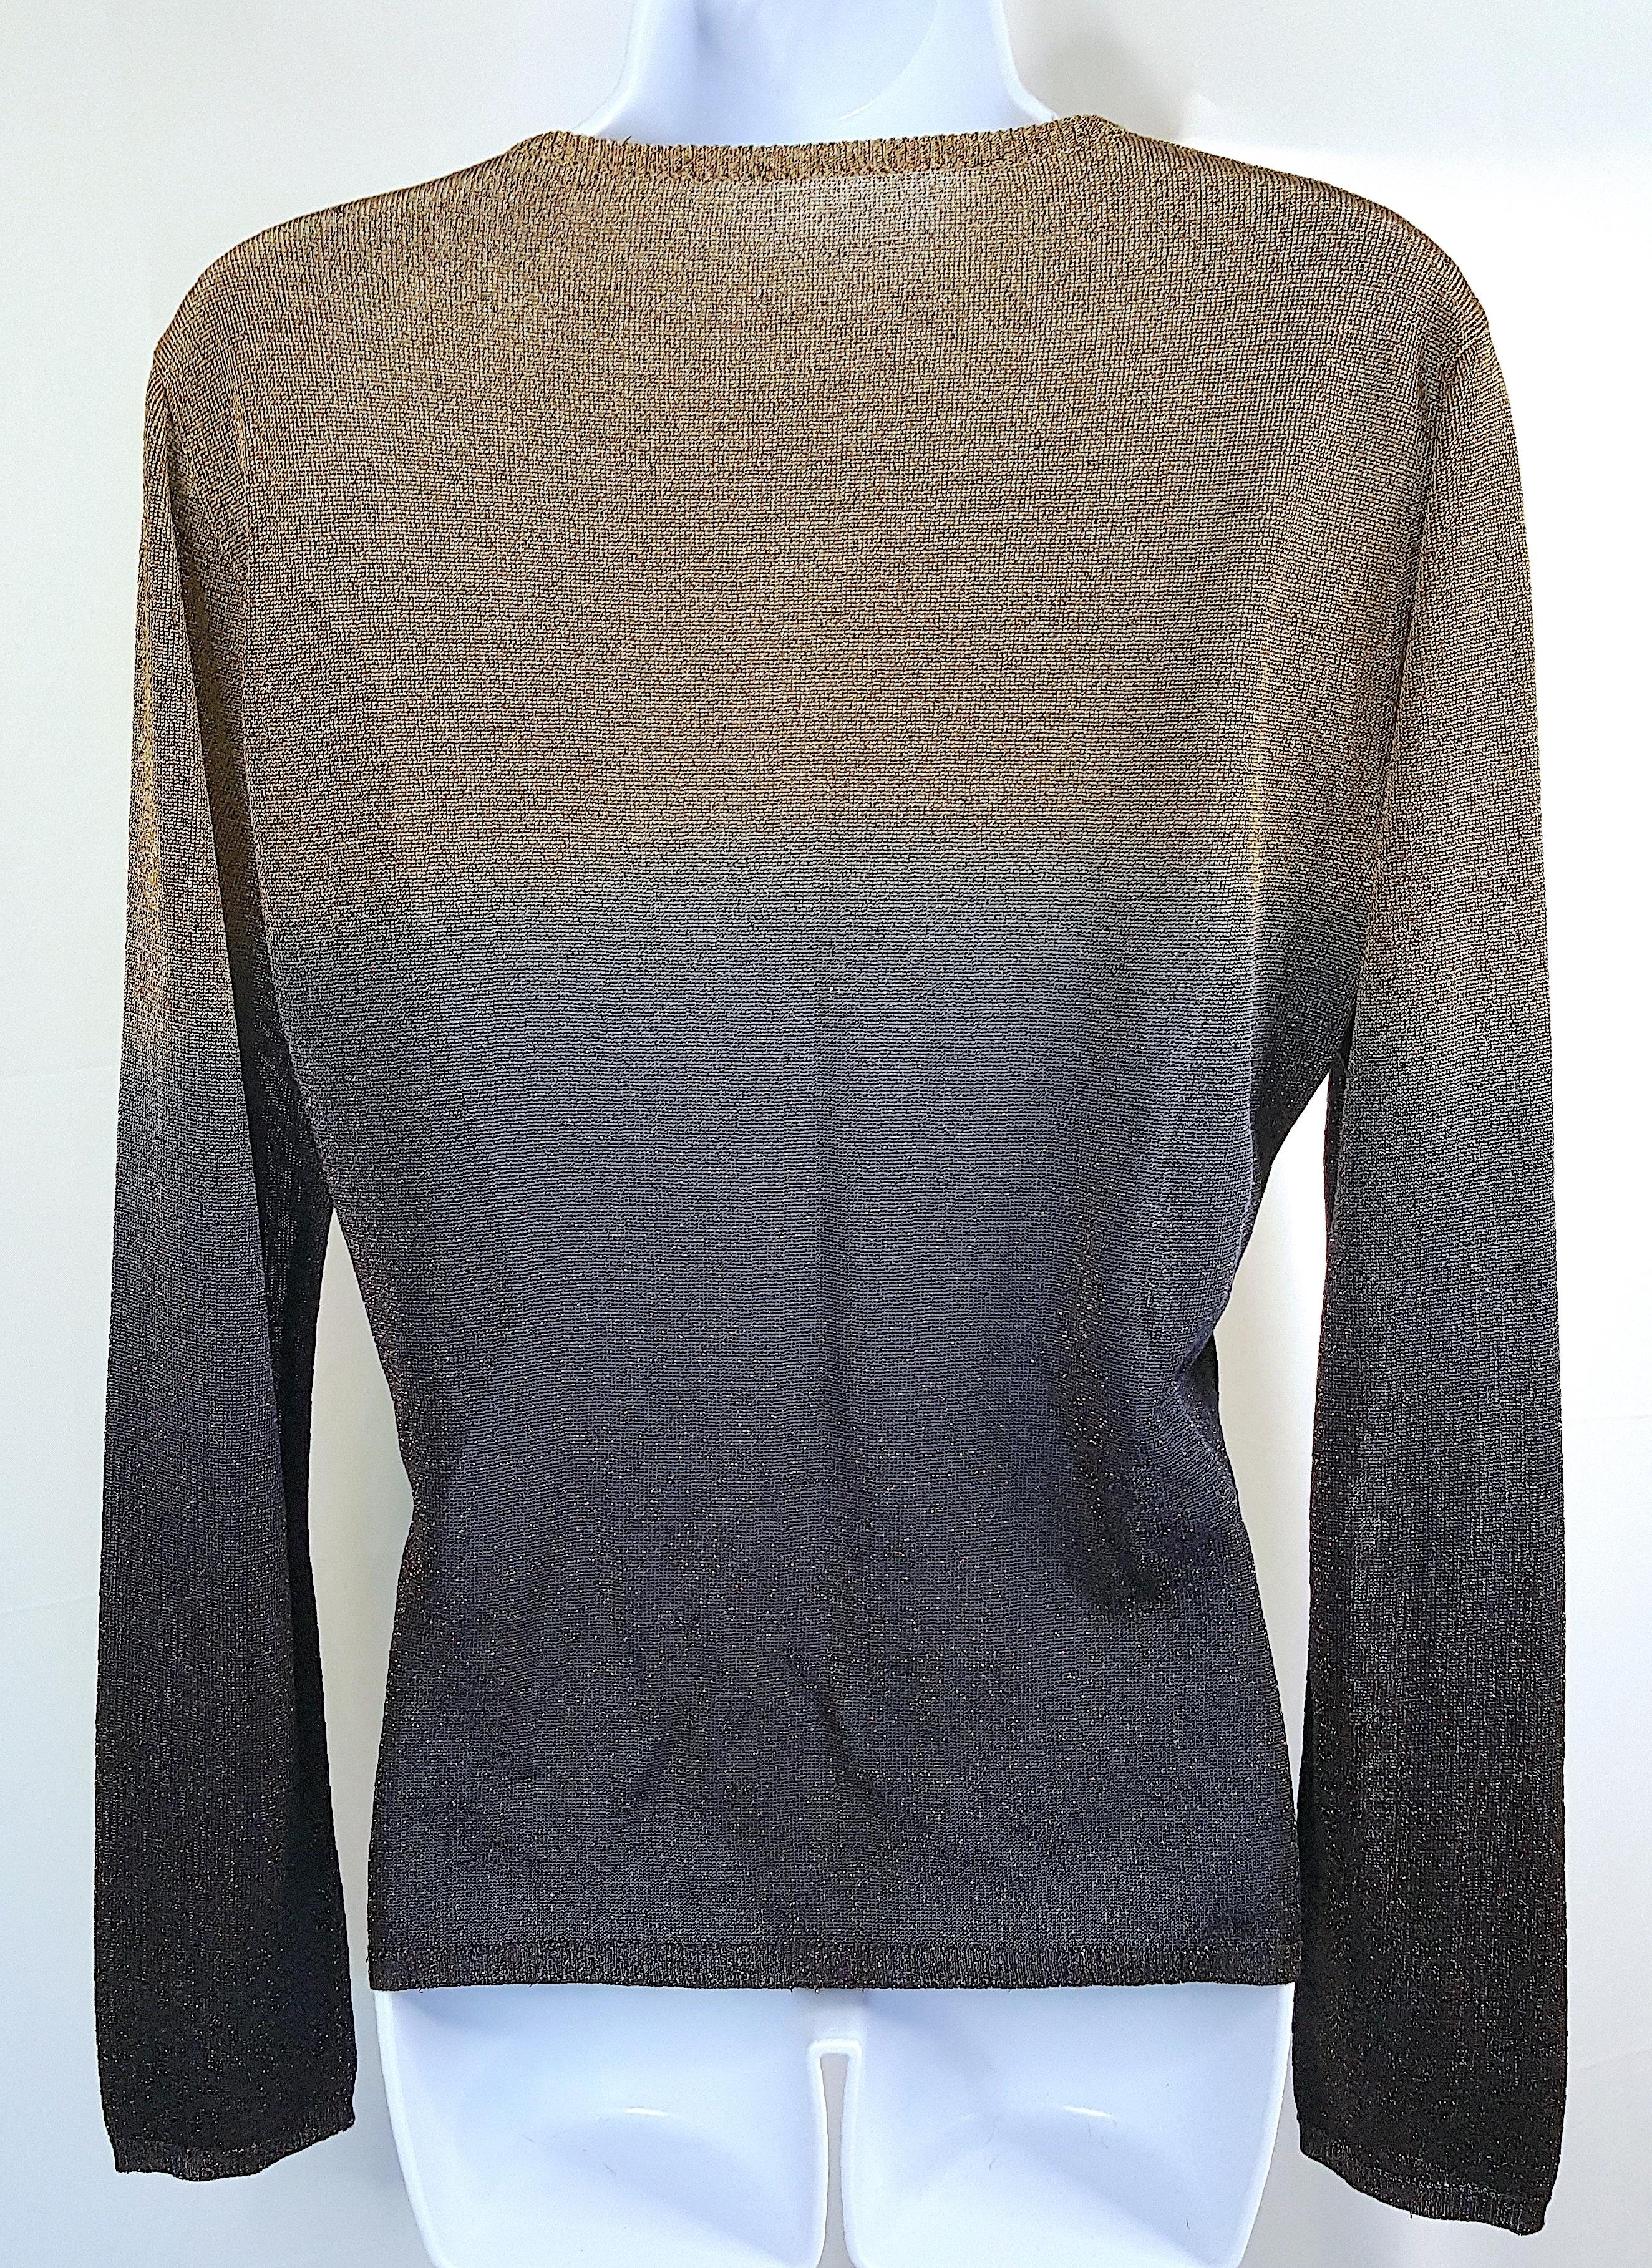 MartinMargiela 1990s MissDeannaKnit GoldLurexThreaded FauxDipDyed Ombre Pullover For Sale 7